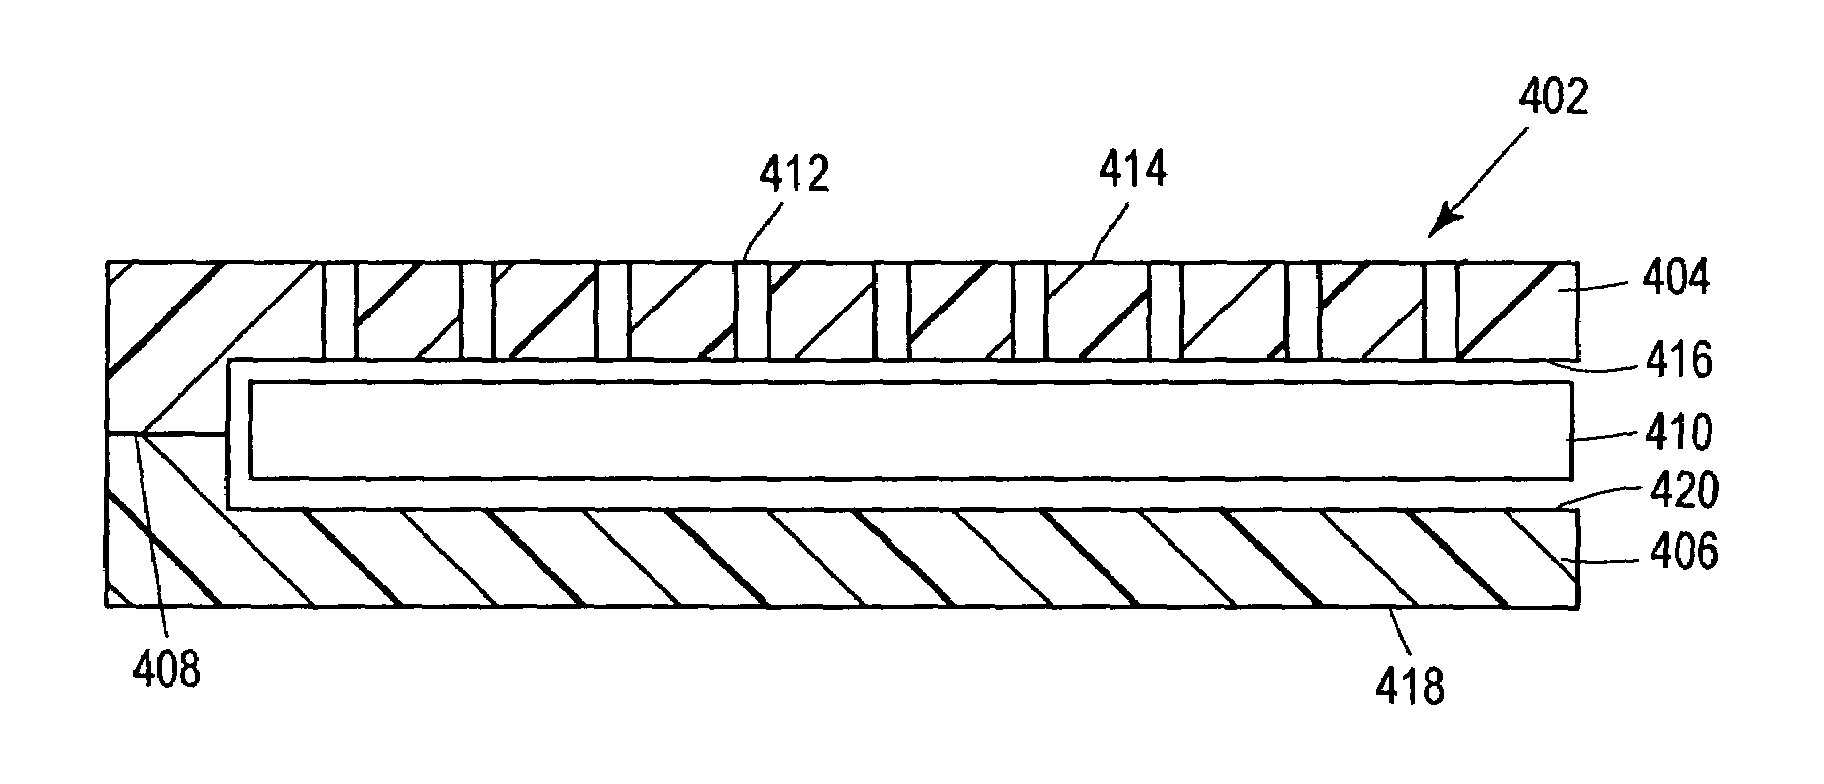 Processing substrate and method of manufacturing same